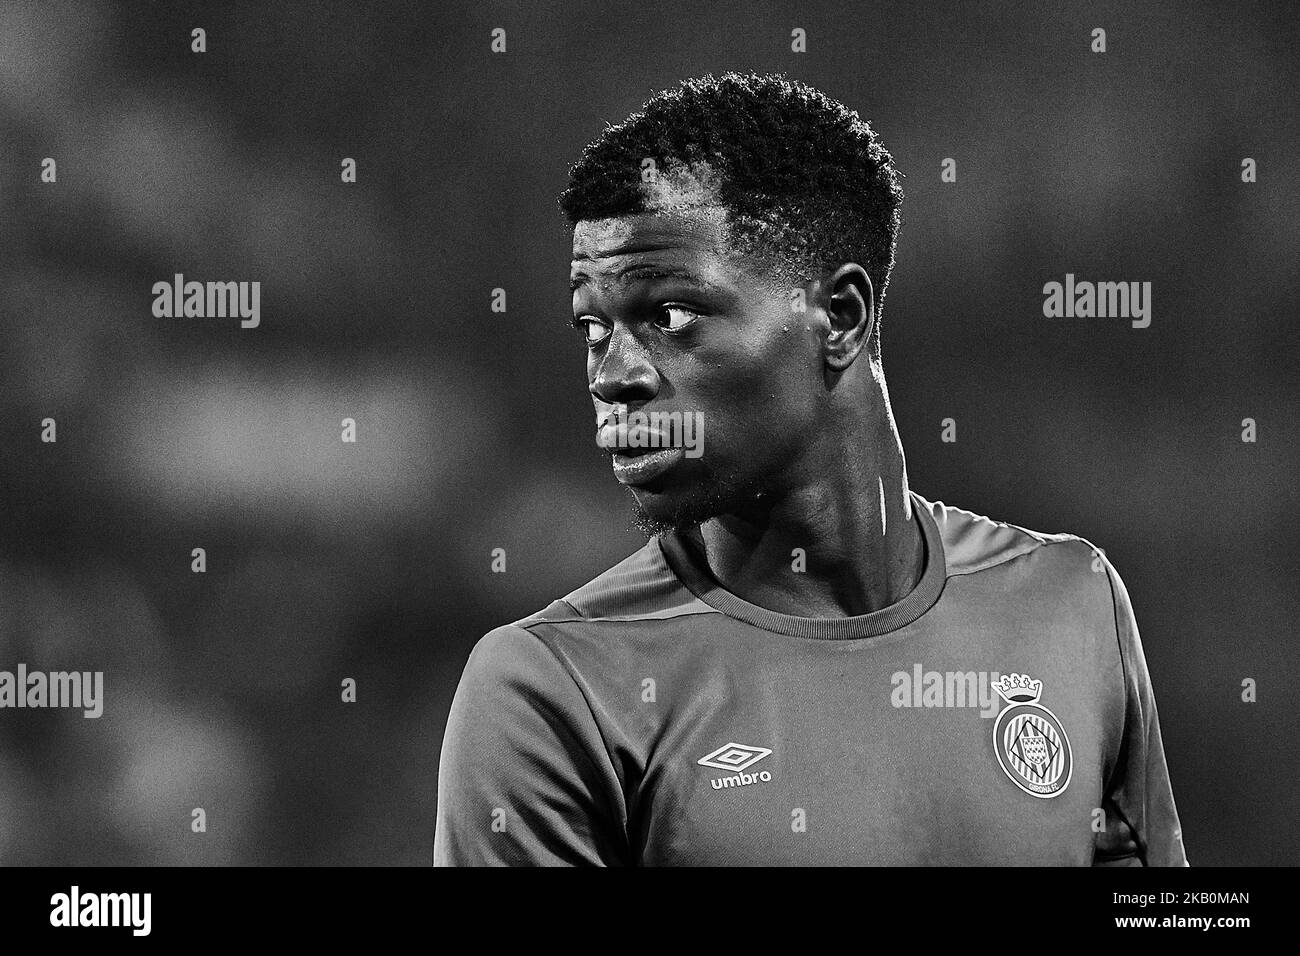 (EDITORS NOTE: the image has been converted to black and white) Kevin Soni of Girona FC looks on prior to the La Liga match between Villarreal CF and Girona FC at Estadio de la Ceramica on August 31, 2018 in Vila-real, Spain (Photo by David Aliaga/NurPhoto) Stock Photo